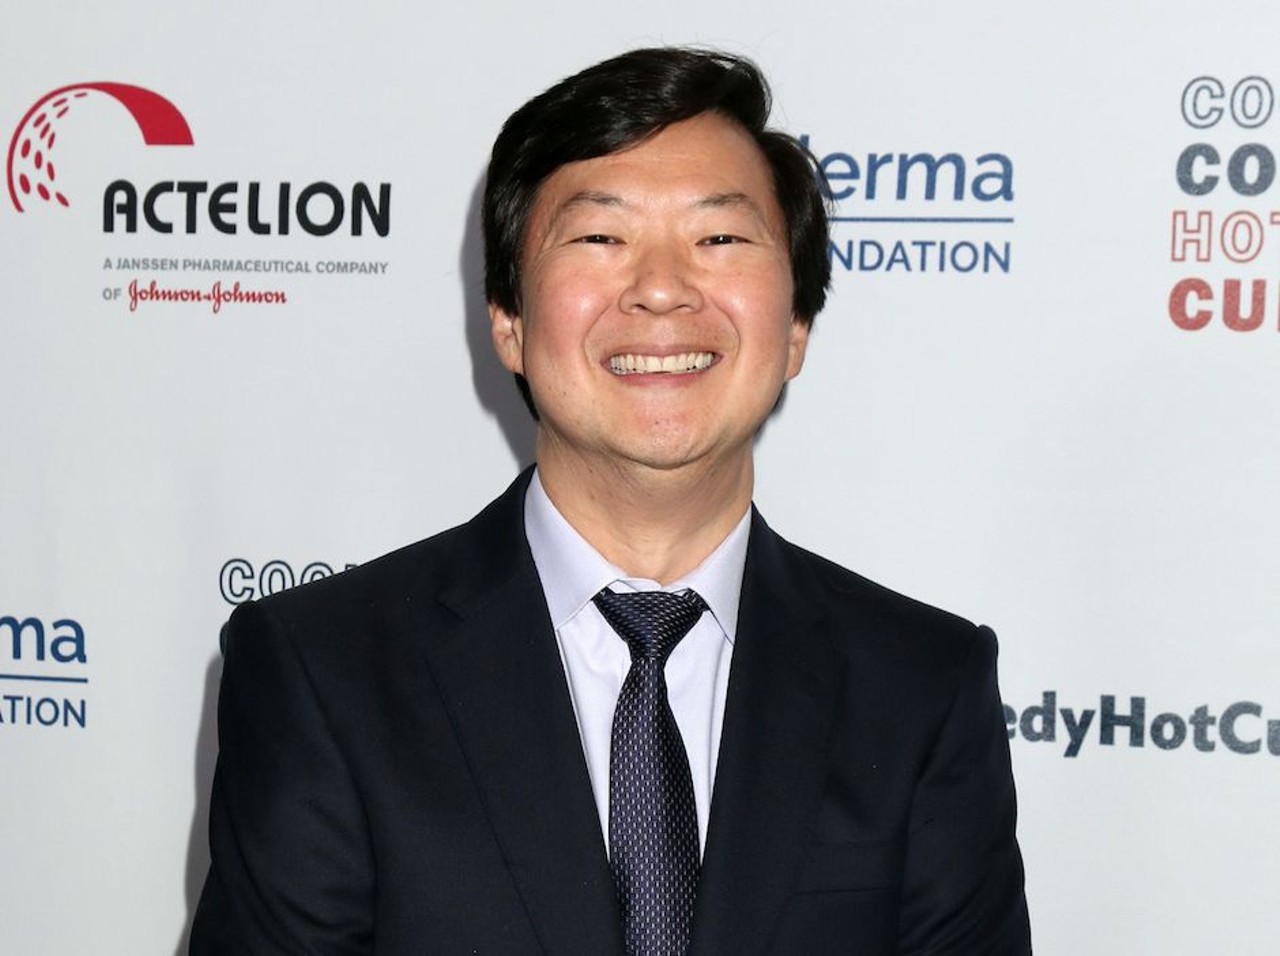 Ken Jeong 
That&#146;s Dr. Ken Jeong to you. This physician-turned-comedic actor is known for his role as Ben Chang on the CBS comedy Community, and is co-star to Bradley Cooper, Ed Helms, and Zach Galifianakis in the popular billion-dollar box office franchise The Hangover. Jeong&#146;s punchlines and personality are what captivate his audience, as well as what landed him a slew of acting gigs. In 2004, Jeong married longtime girlfriend and breast cancer survivor Tran Ho, and they have twin daughters together. Jeong&#146;s first comedy special that premiered on Netflix, You Complete Me Ho, was released earlier this year on Valentine&#146;s Day.&nbsp; 
Kathy Hutchins / Shutterstock